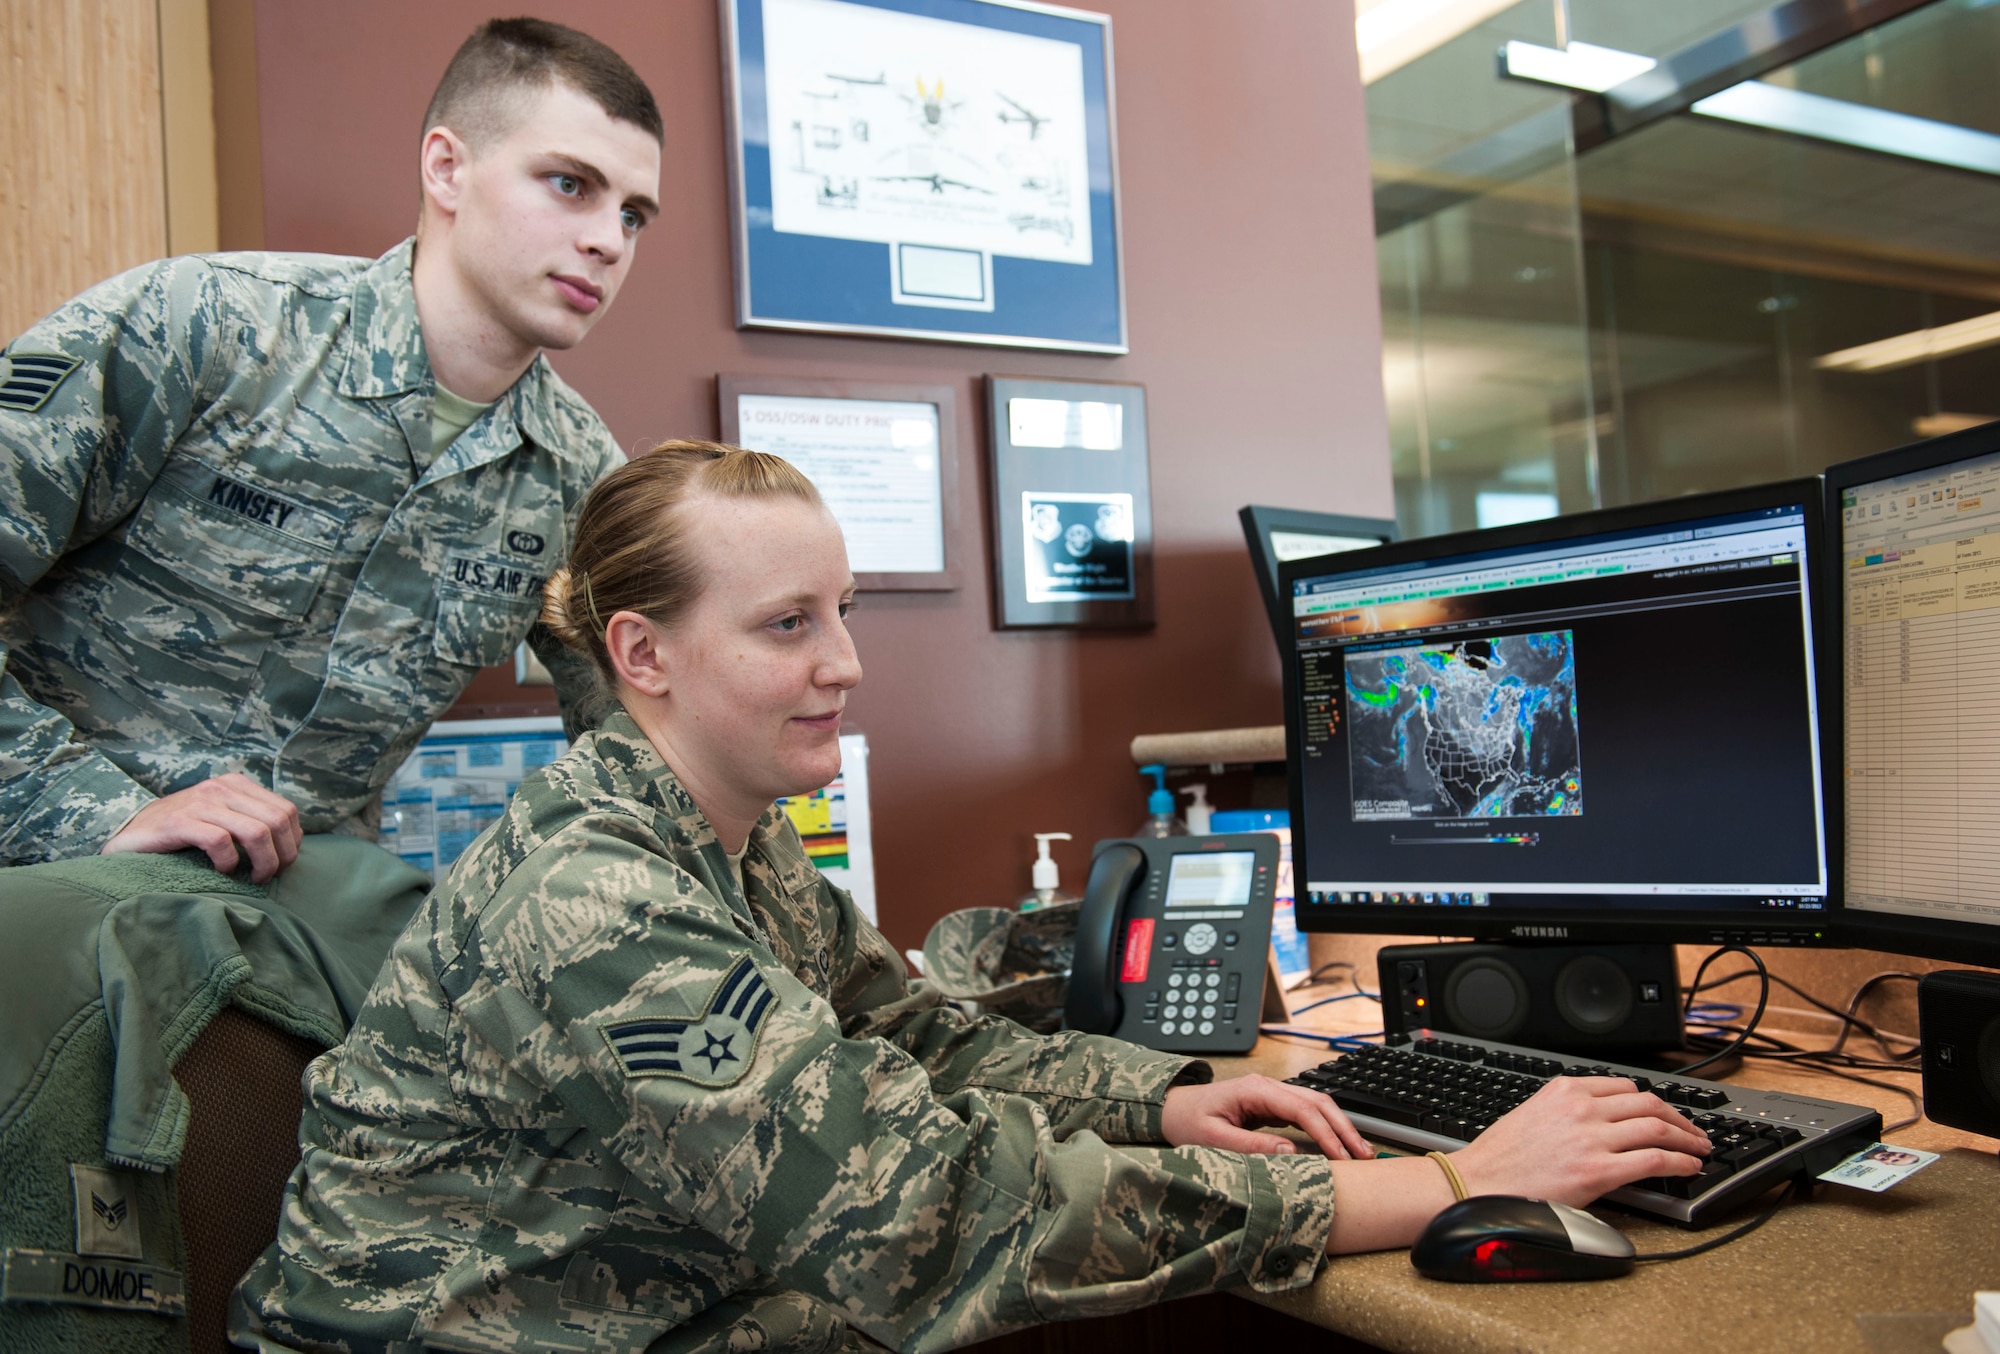 Staff Sgt. Zak A. Kinsey, 5th Operations Support Squadron noncommissioned officer in charge of mission weather, checks the work of Senior Airman Courtney Domoe, 5th OSS weather forecaster, Oct. 23. The Weather Flight is currently preparing for the harsh North Dakota winter ahead. Their forecast accuracy is crucial for mission readiness. (U.S. Air Force photo/Airman 1st Class Apryl Hall)